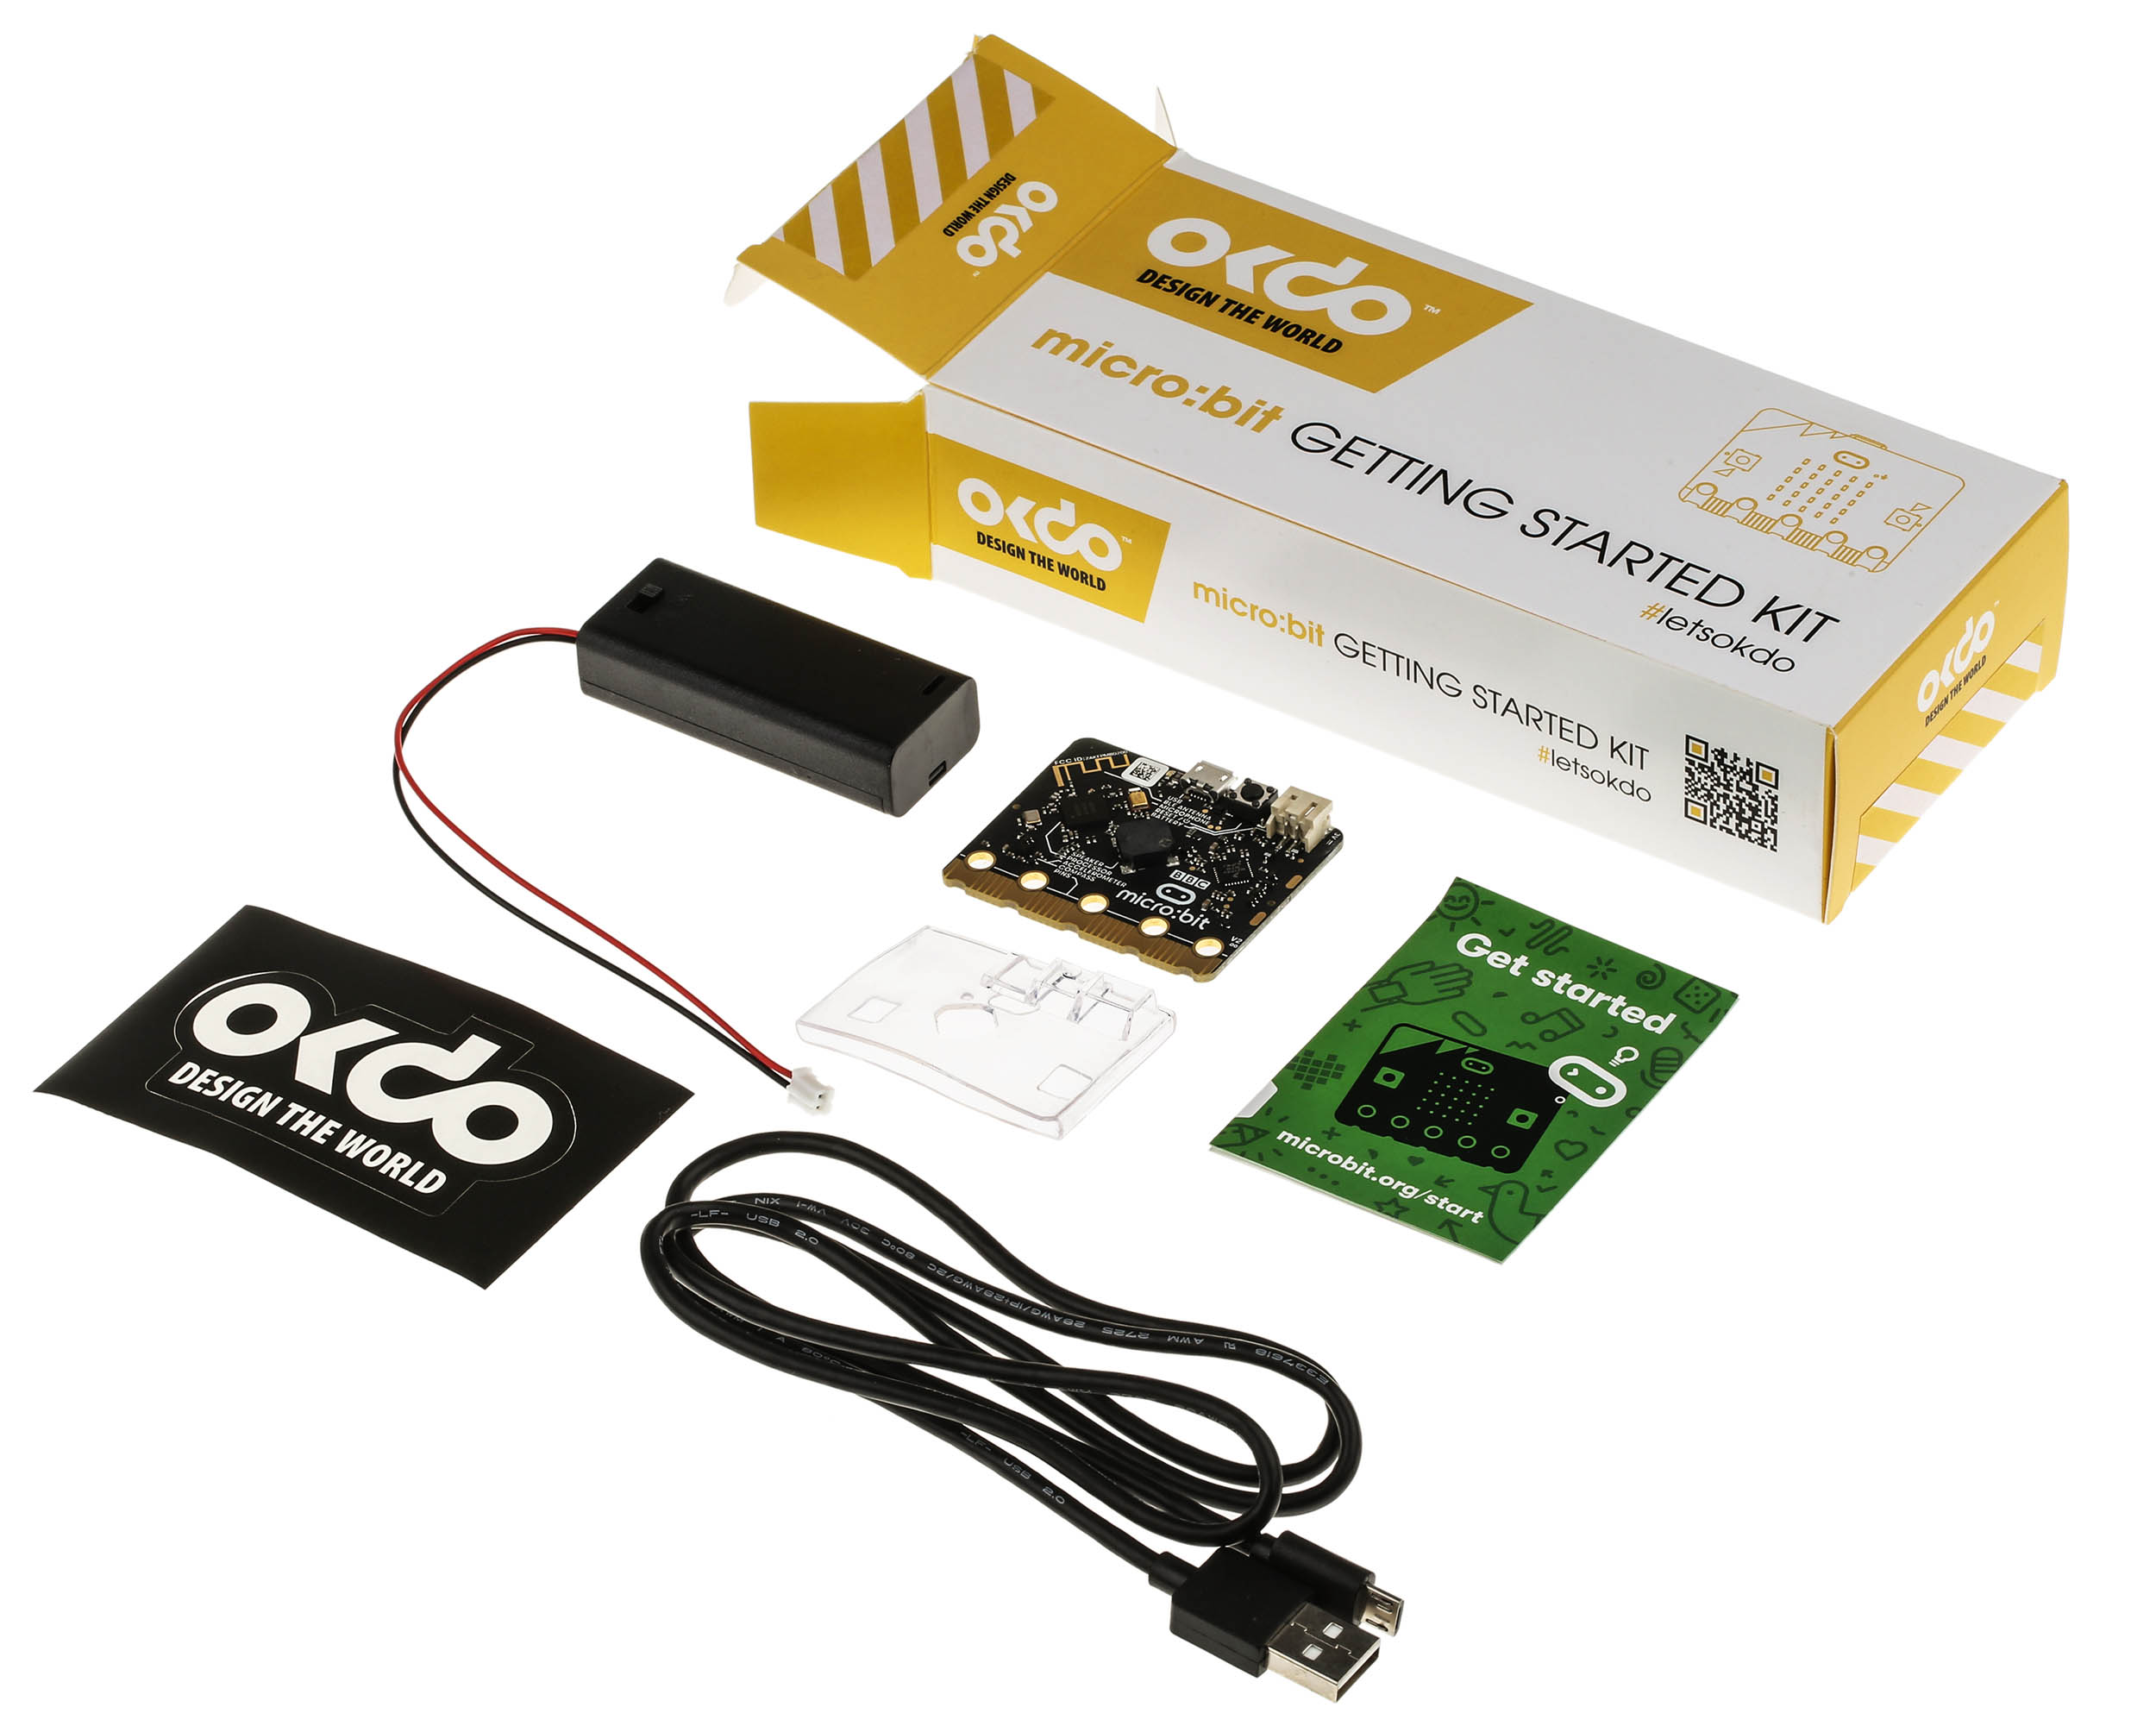 OKdo micro:bit Getting Started Kit product image